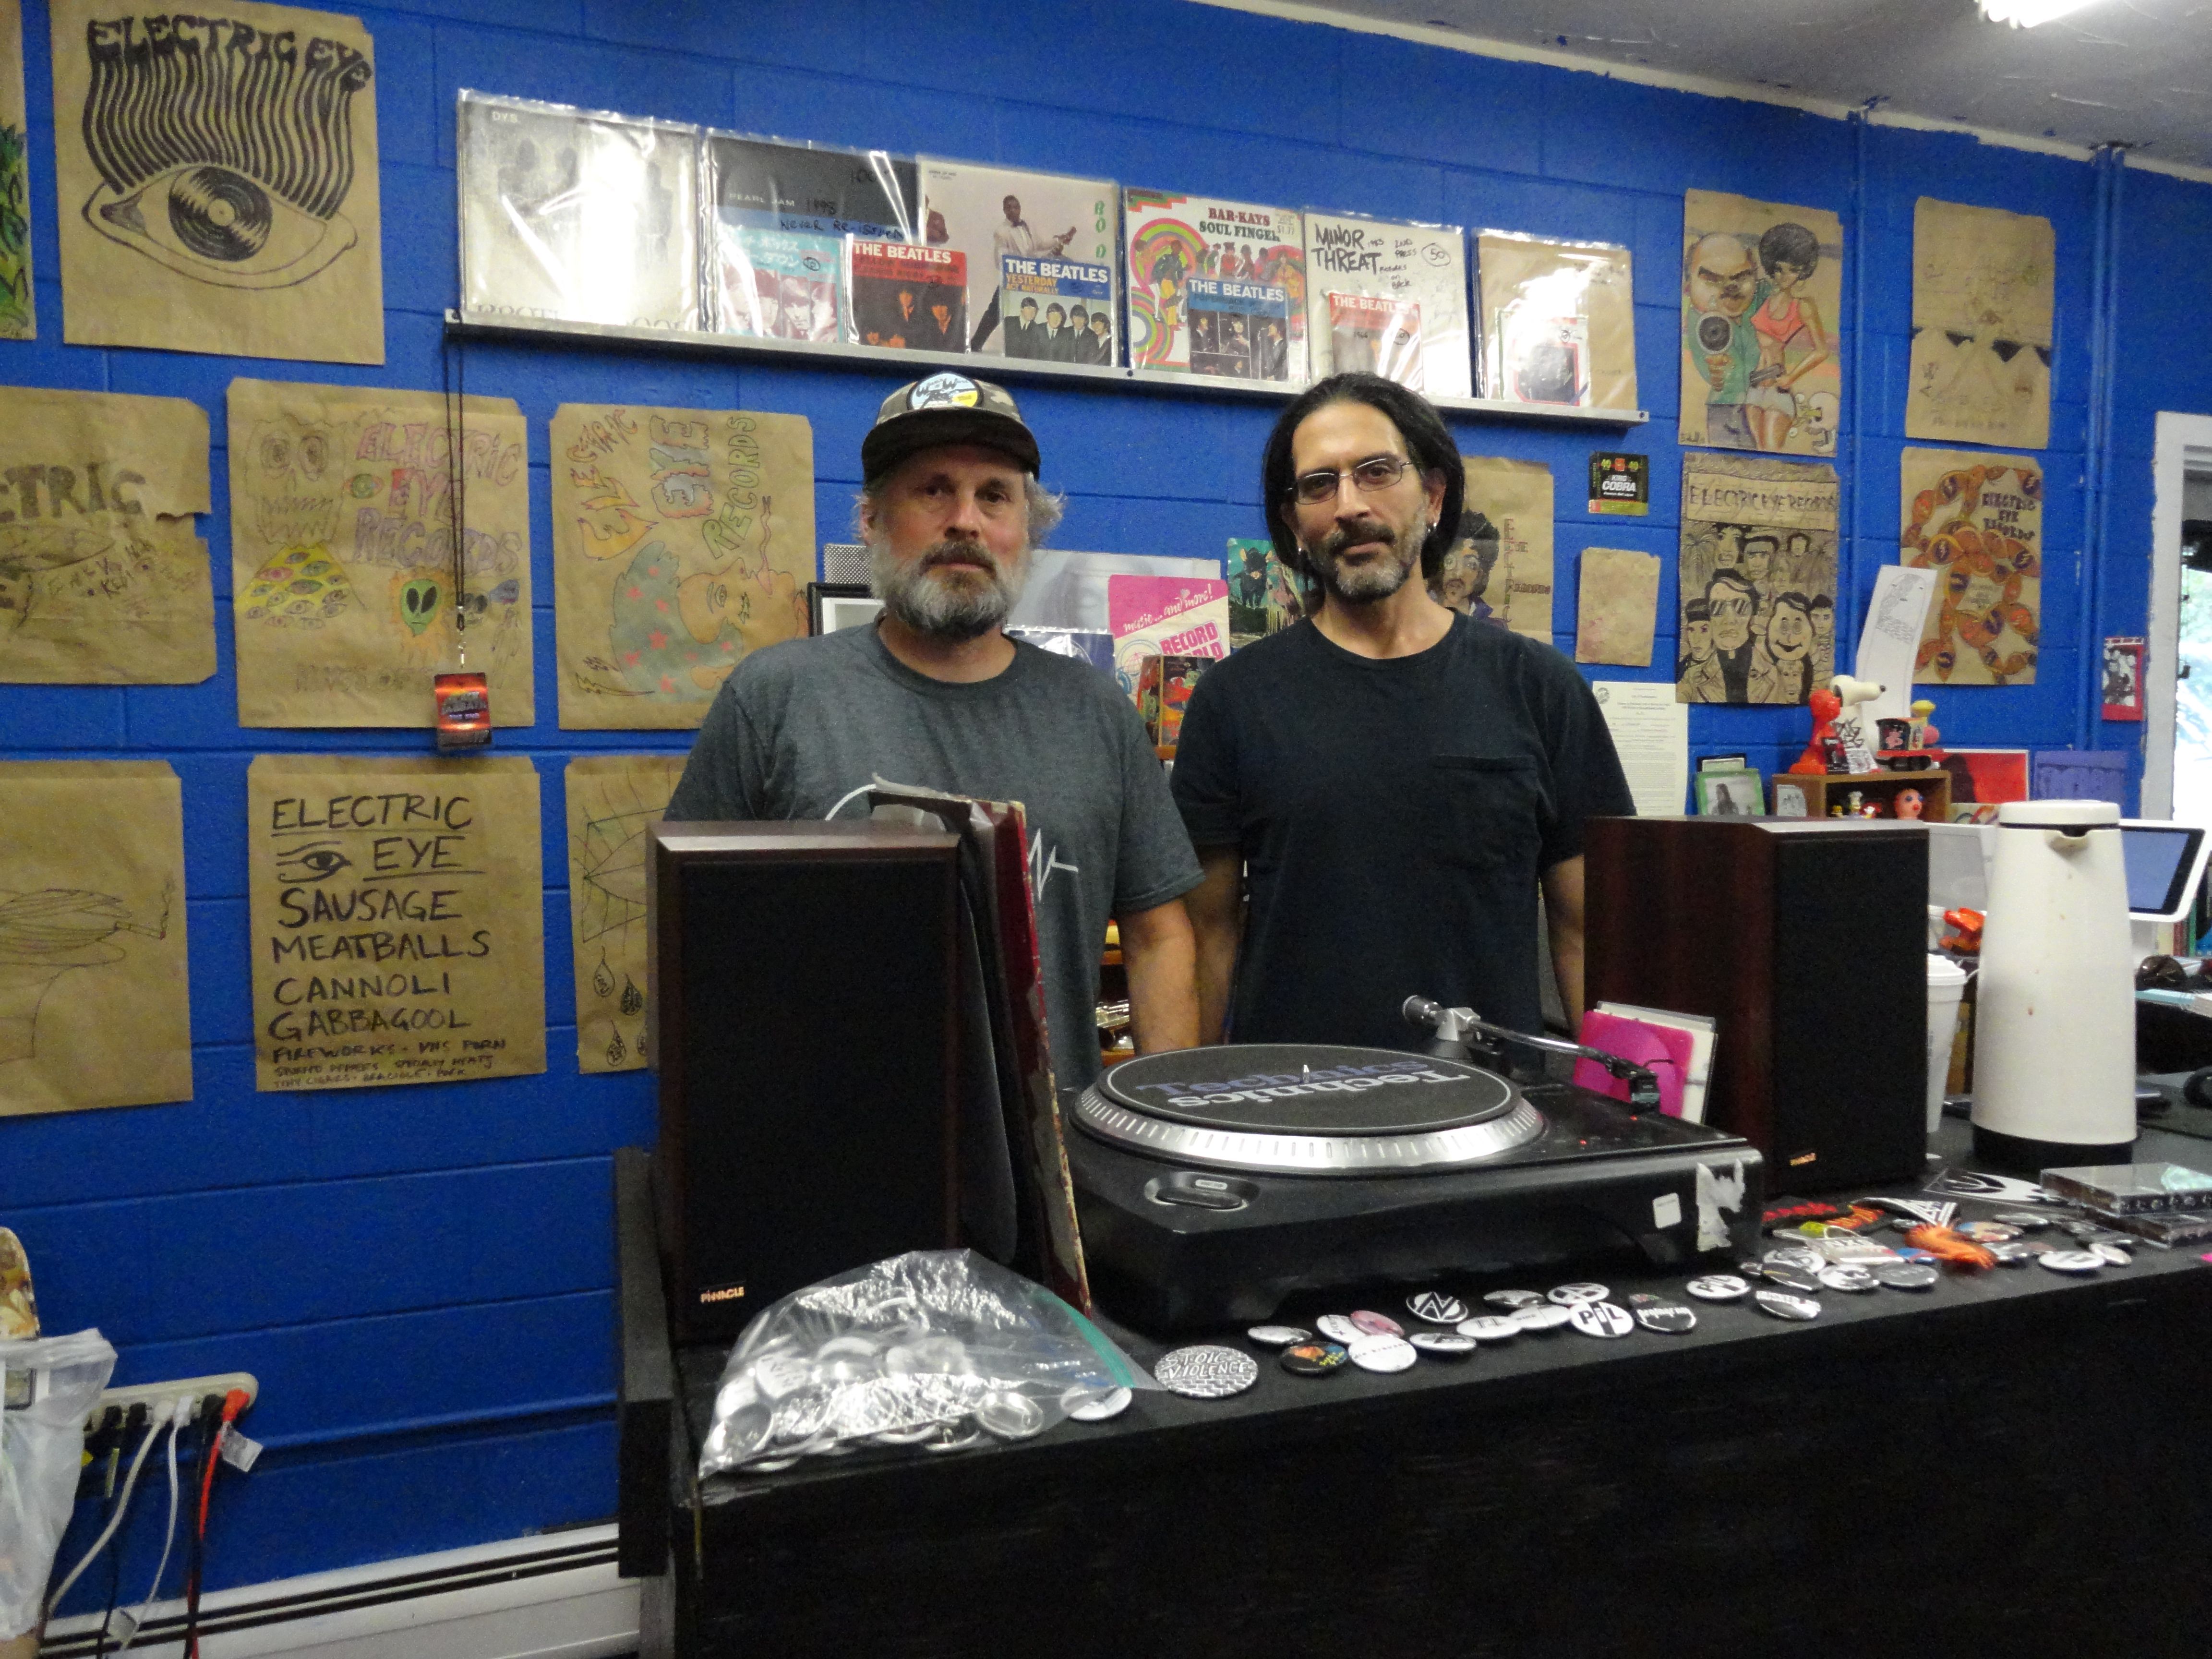 Electrifying the Vinyl: Electric Eye Records in Florence is a vinyl lover’s go-to destination